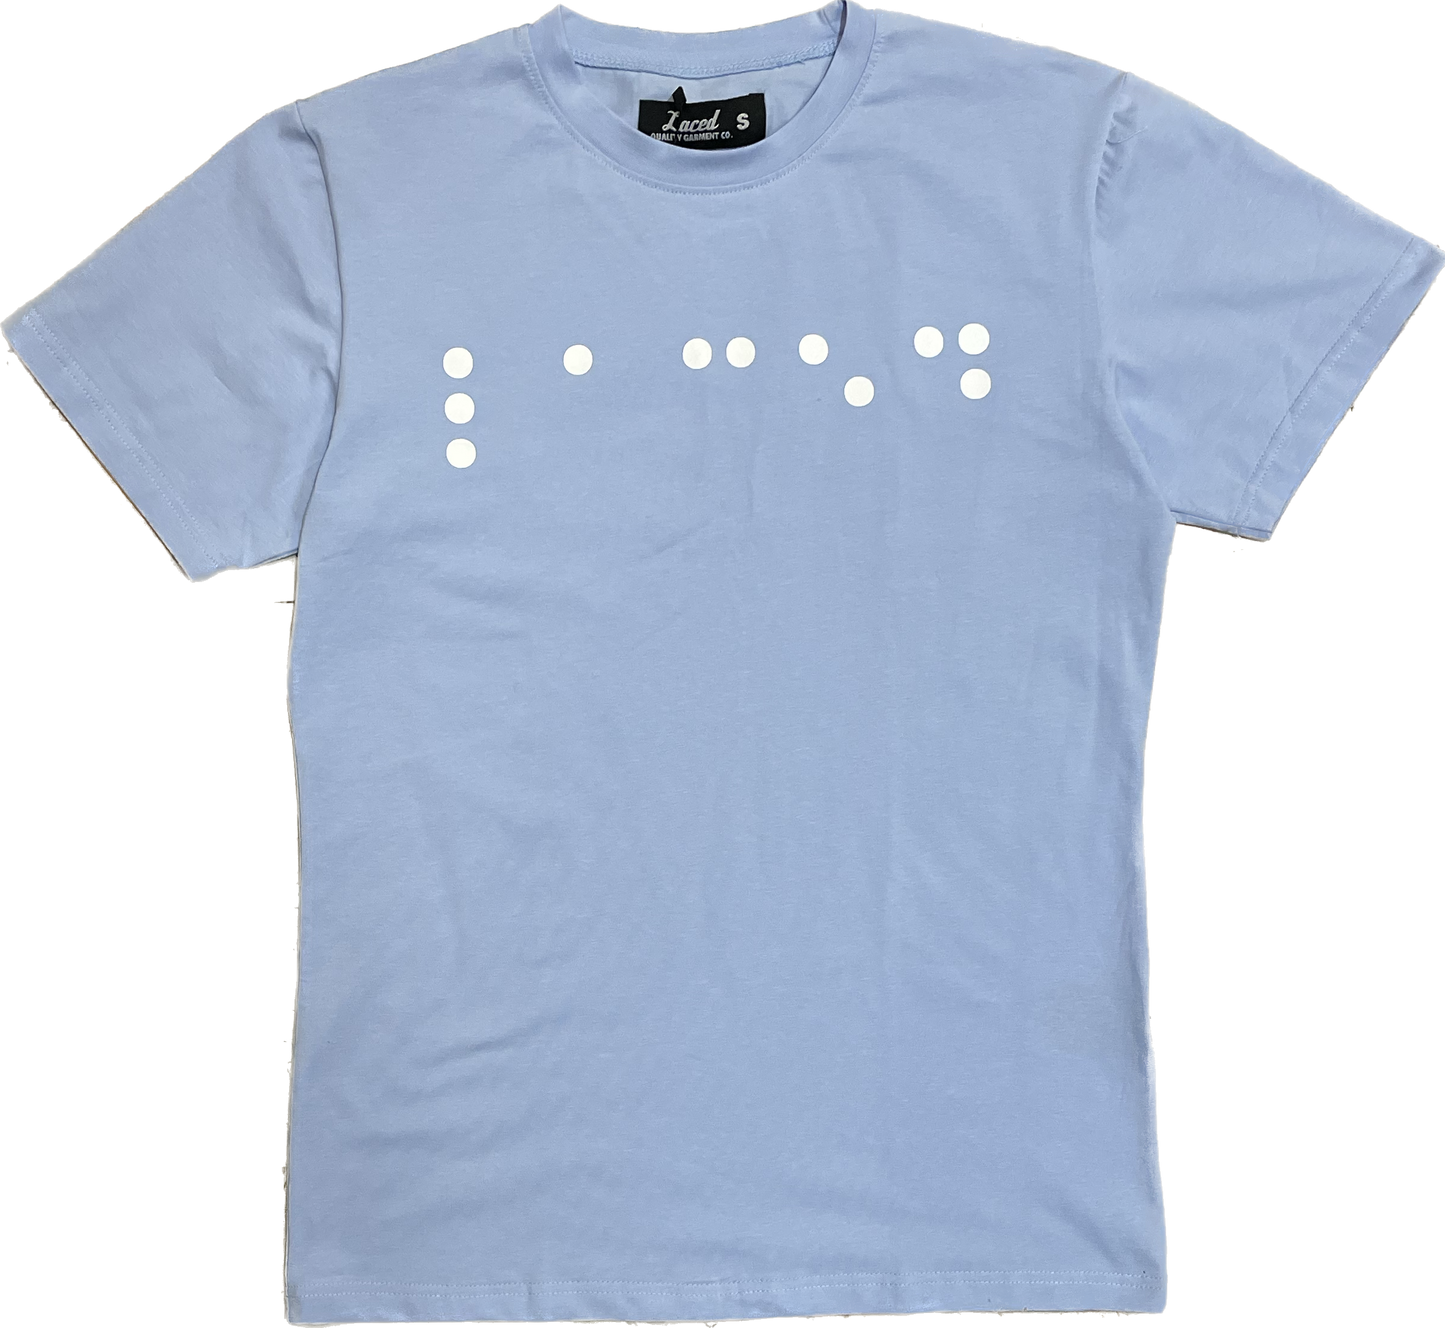 Laced braille 06 tee